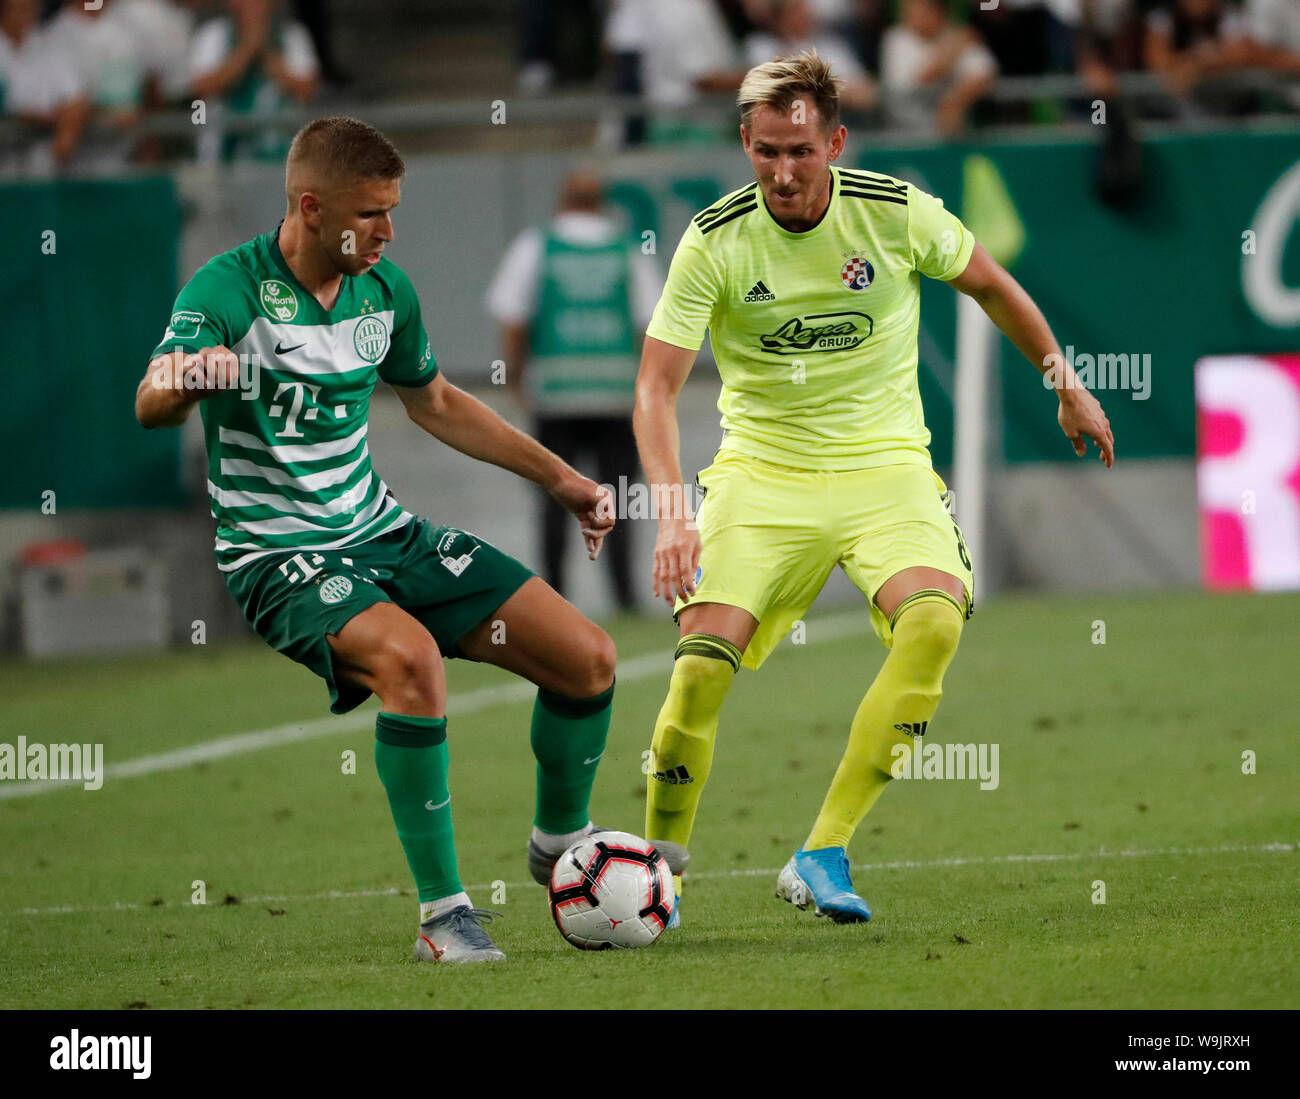 BUDAPEST, HUNGARY - AUGUST 13: (l-r) Eldar Civic of Ferencvarosi TC competes for the ball with Izet Hajrovic of GNK Dinamo Zagreb during the UEFA Champions League Third Qualifying Round match between Ferencvarosi TC and GNK Dinamo Zagreb at Ferencvaros Stadium on August 13, 2019 in Budapest, Hungary. Stock Photo